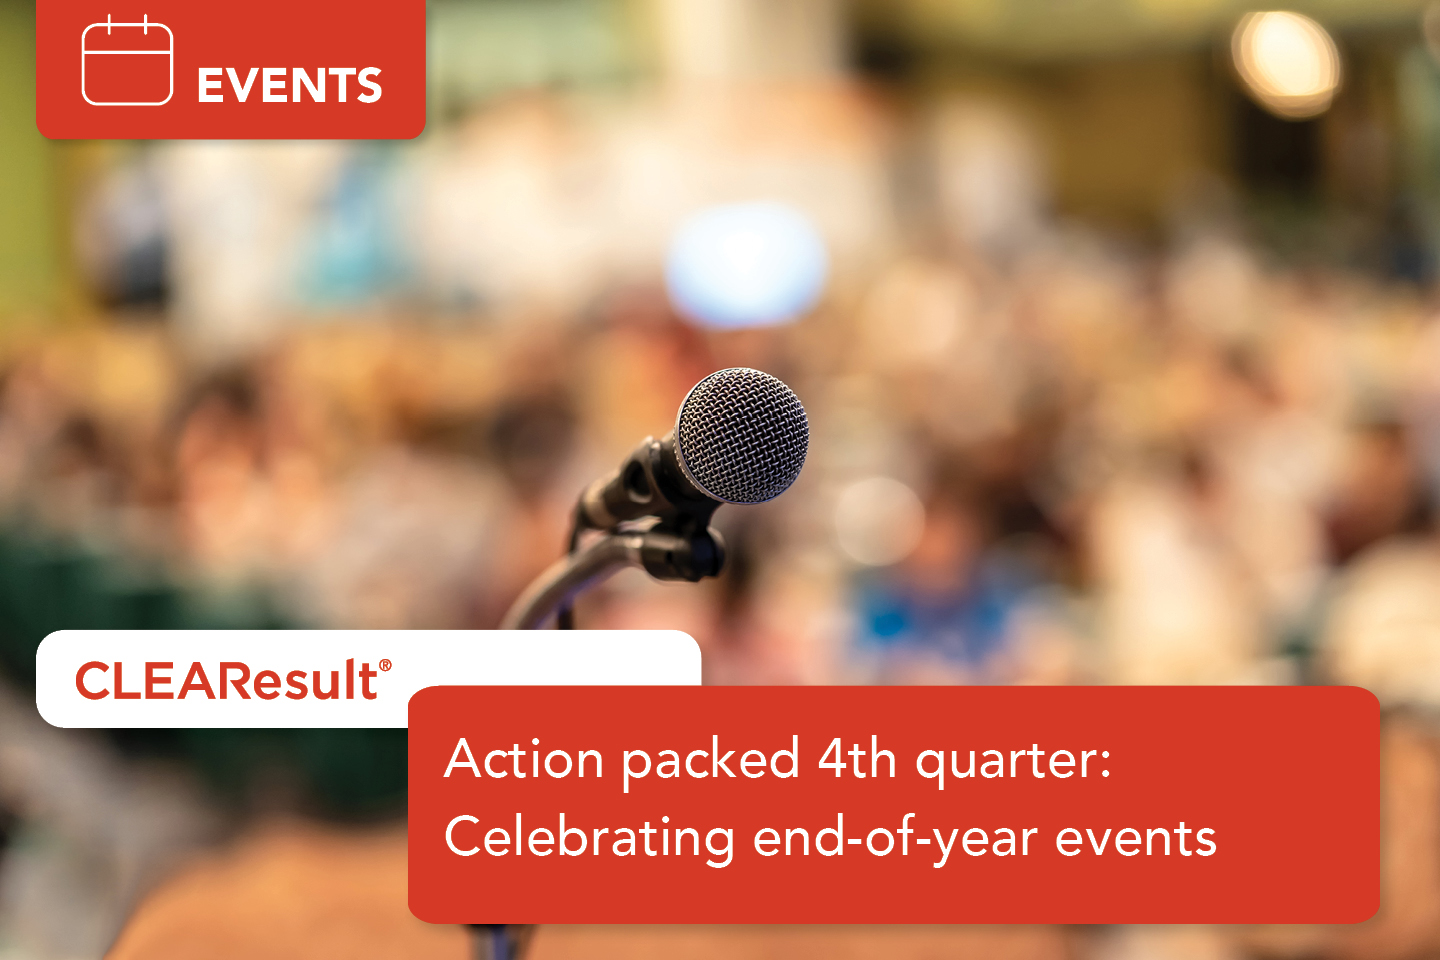 Action packed 4th quarter: Celebrating end-of-year events.